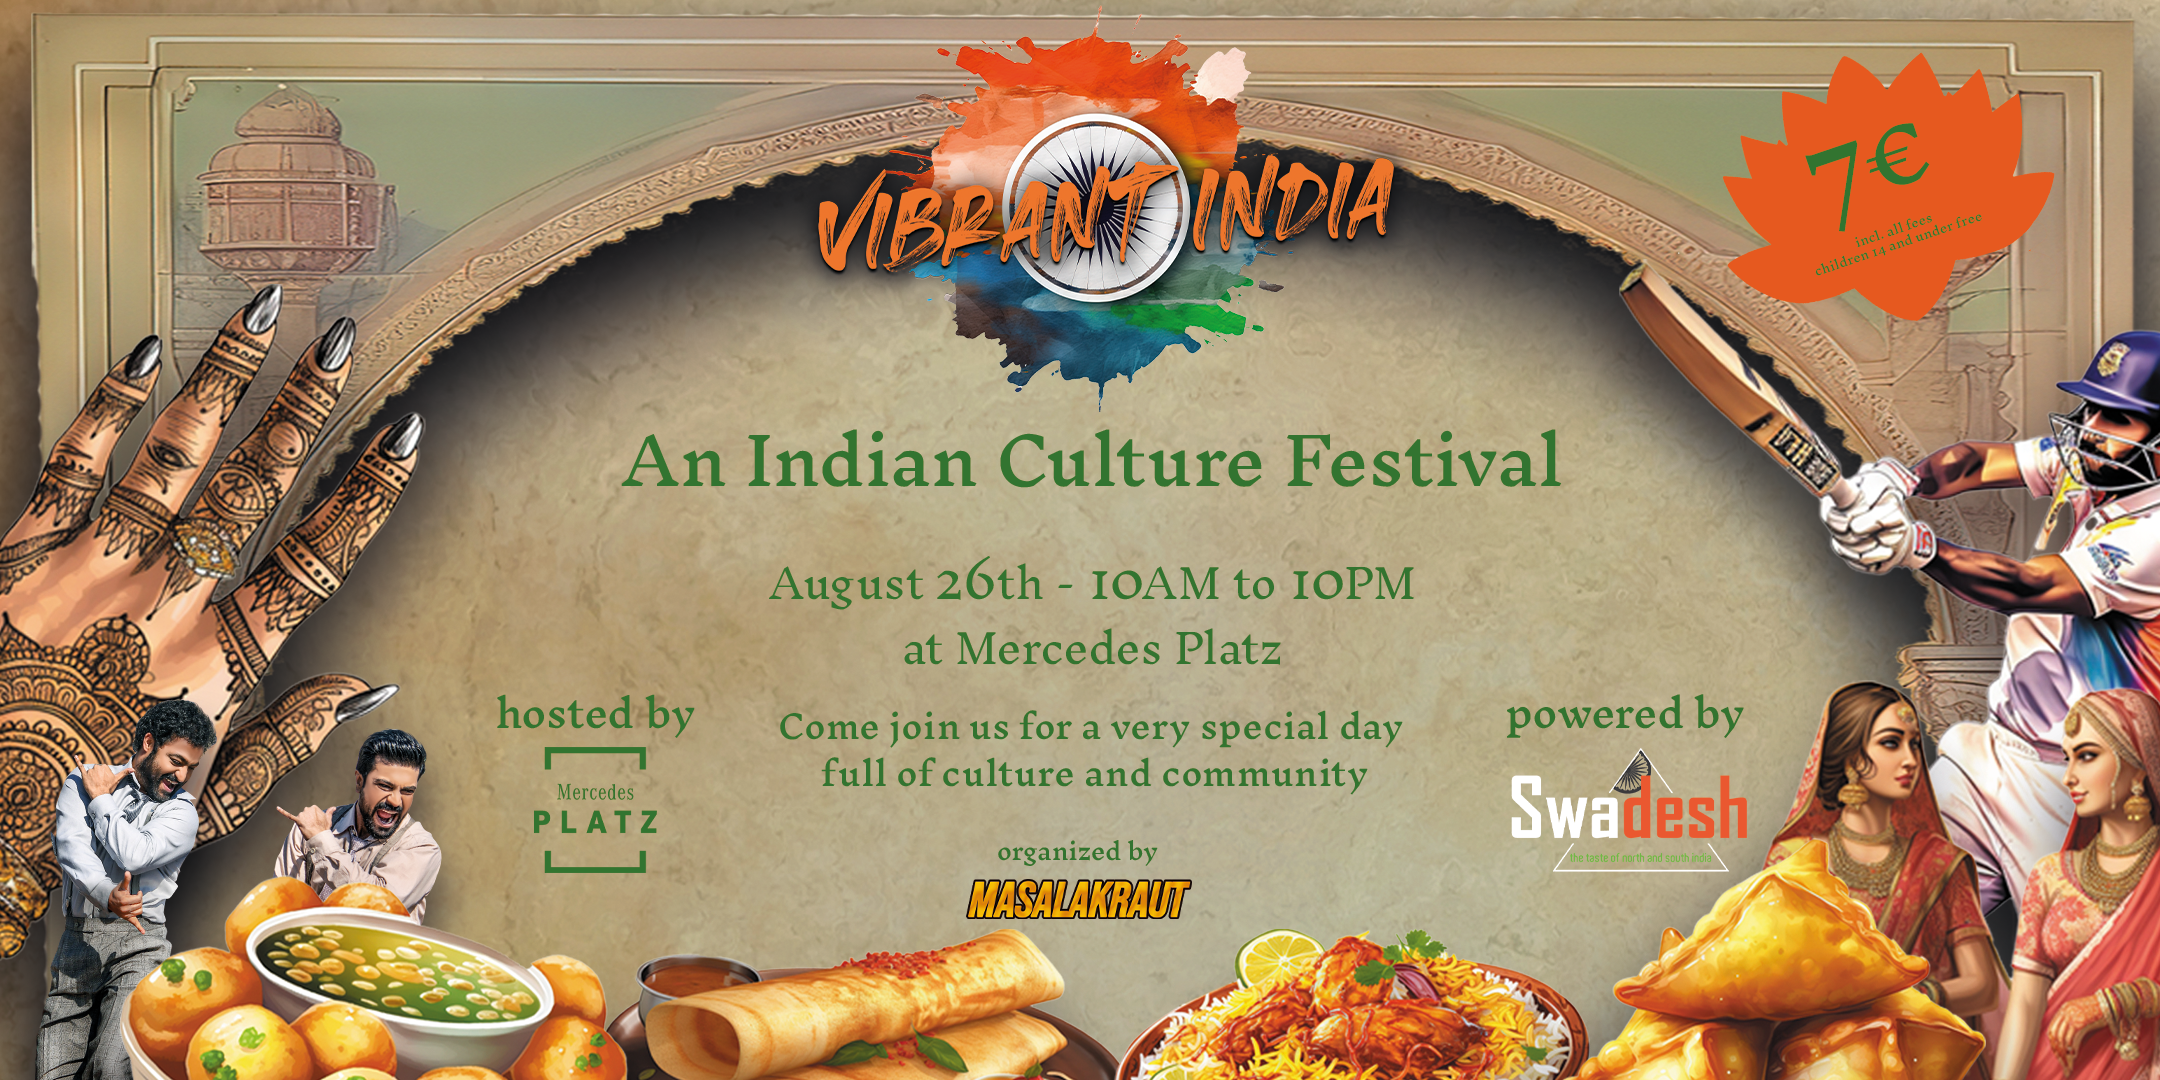 Vibrant India – An Indian Culture Festival